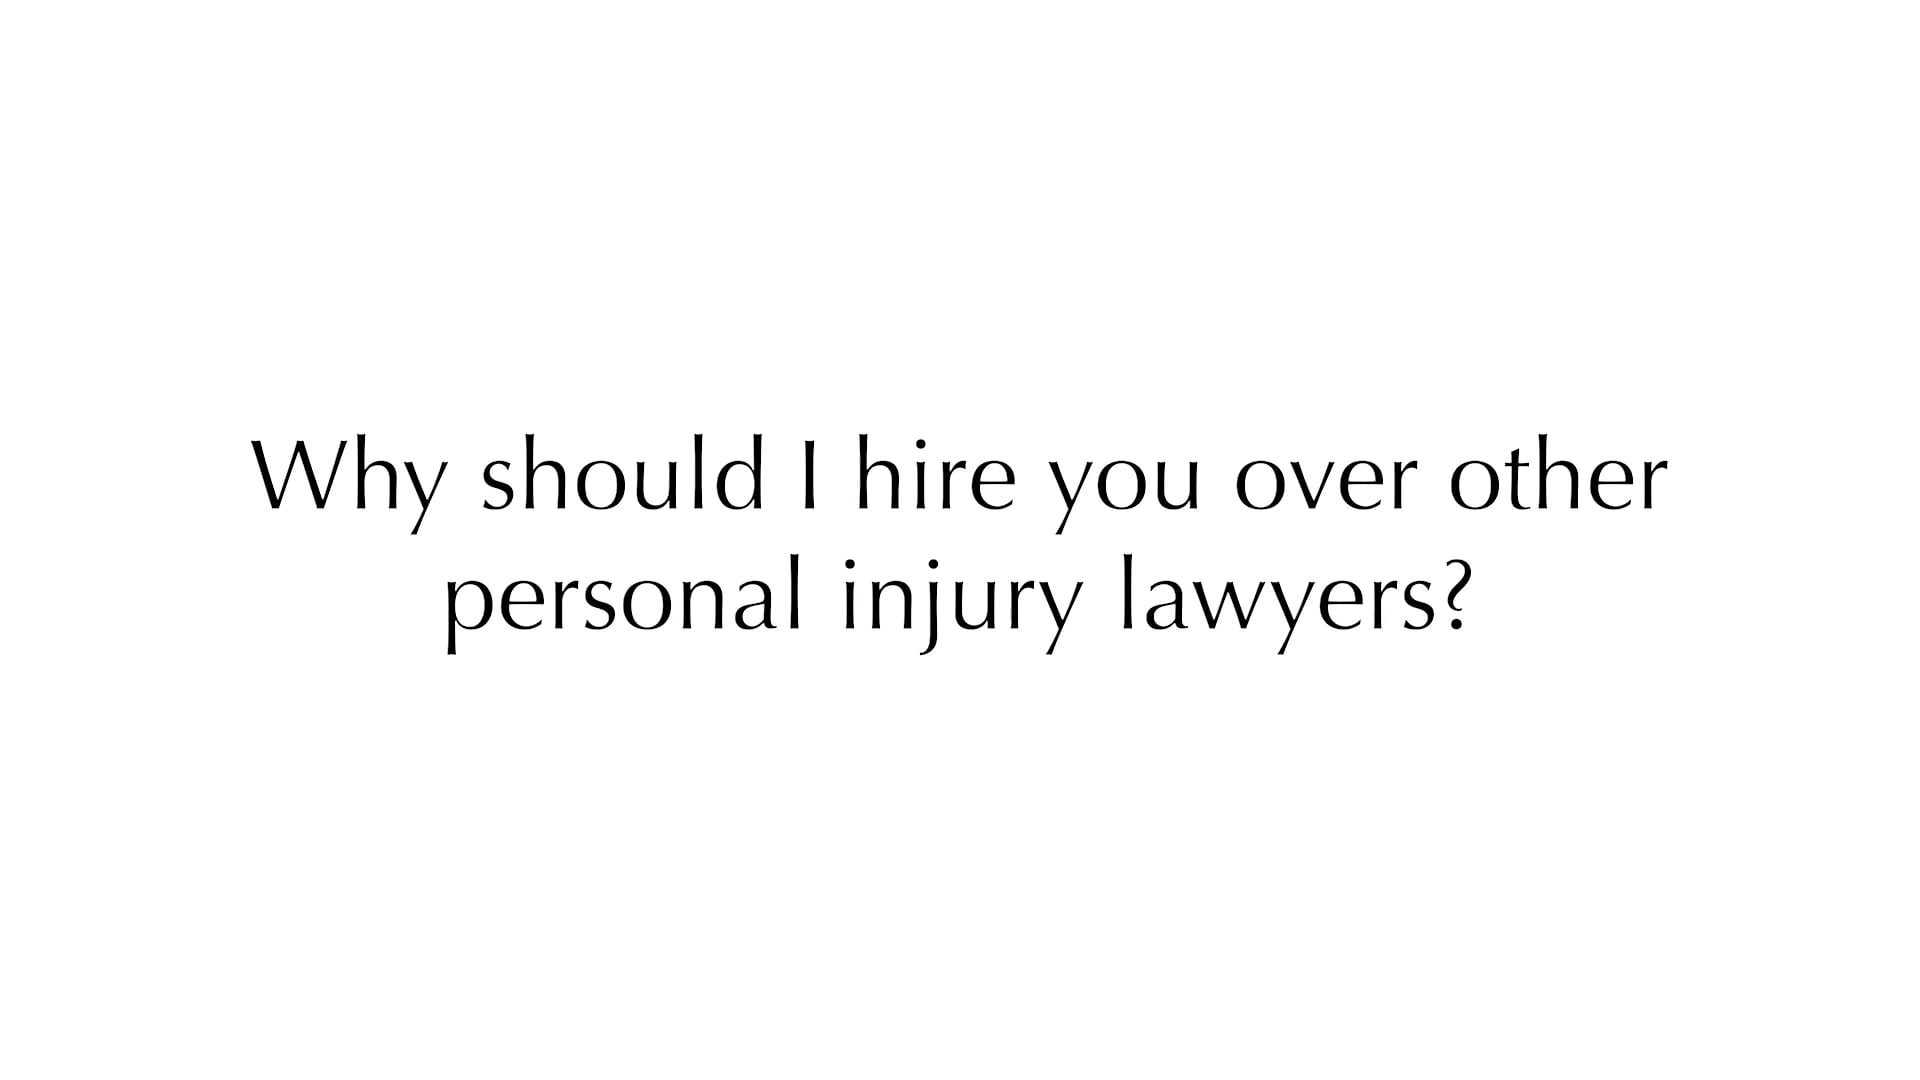 Why should I hire you over other personal injury lawyers